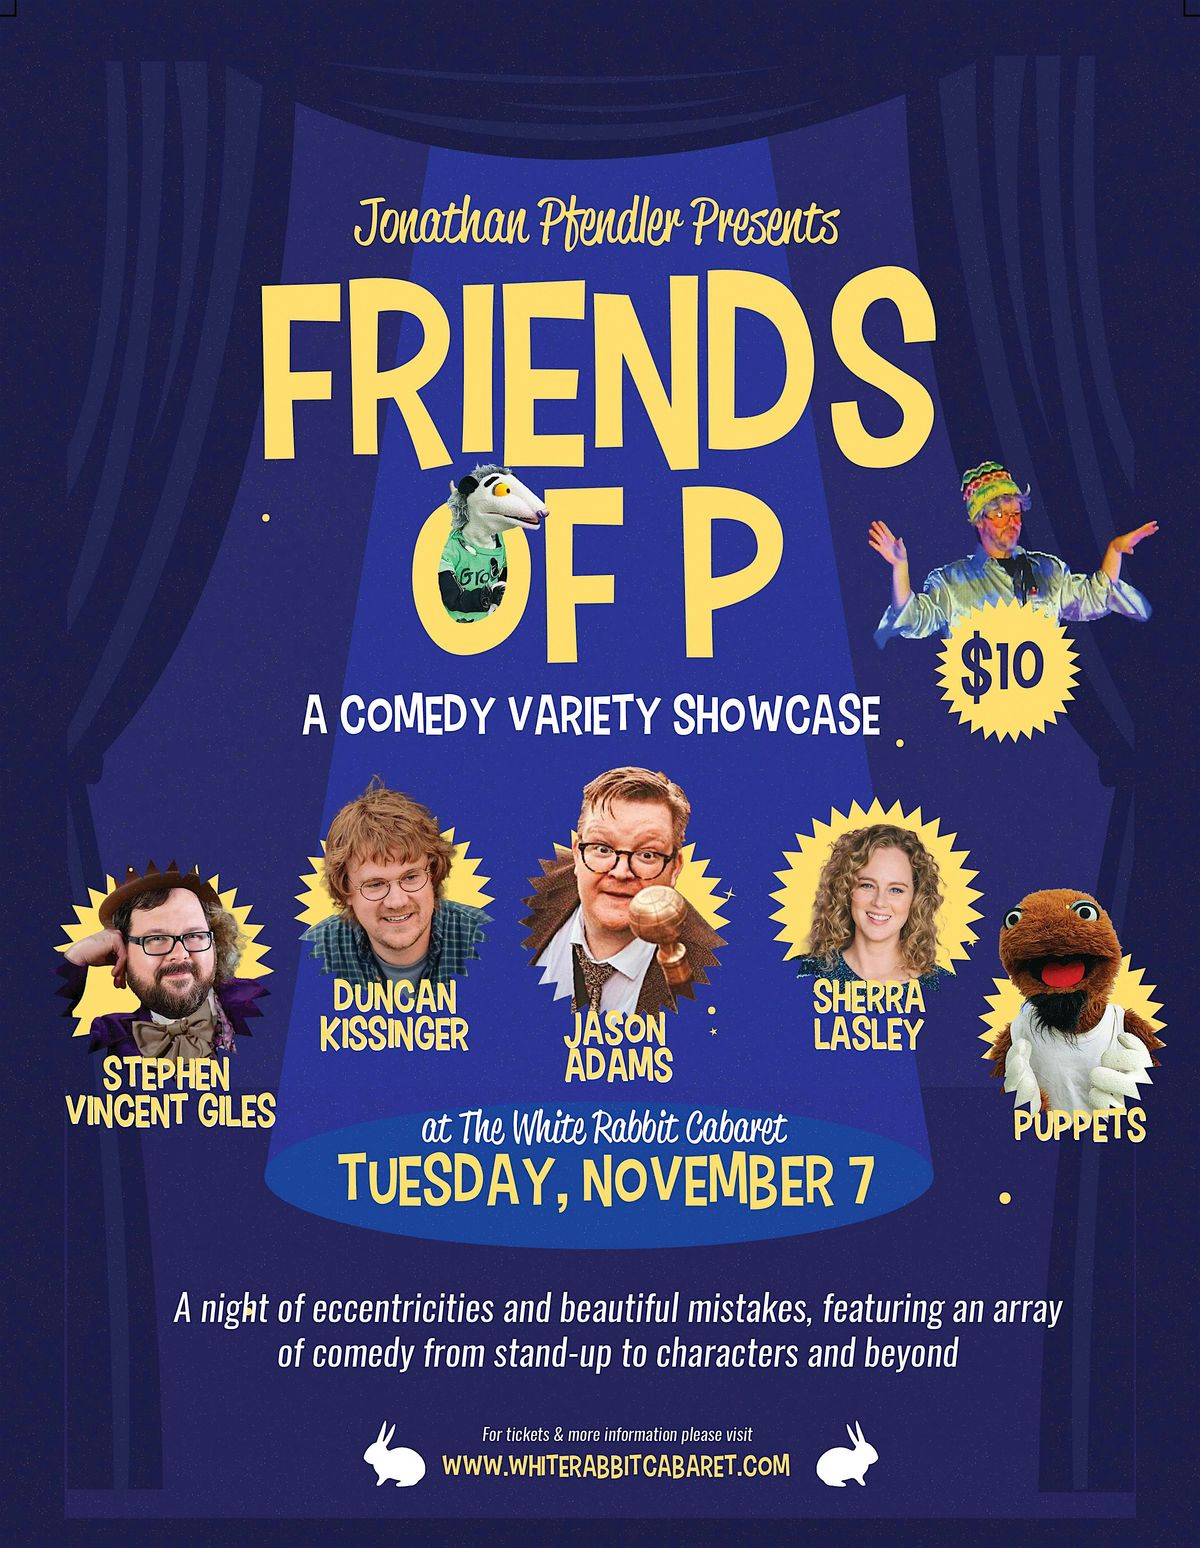 Jonathan Pfendler presents Friends of P - A Comedy Variety Show